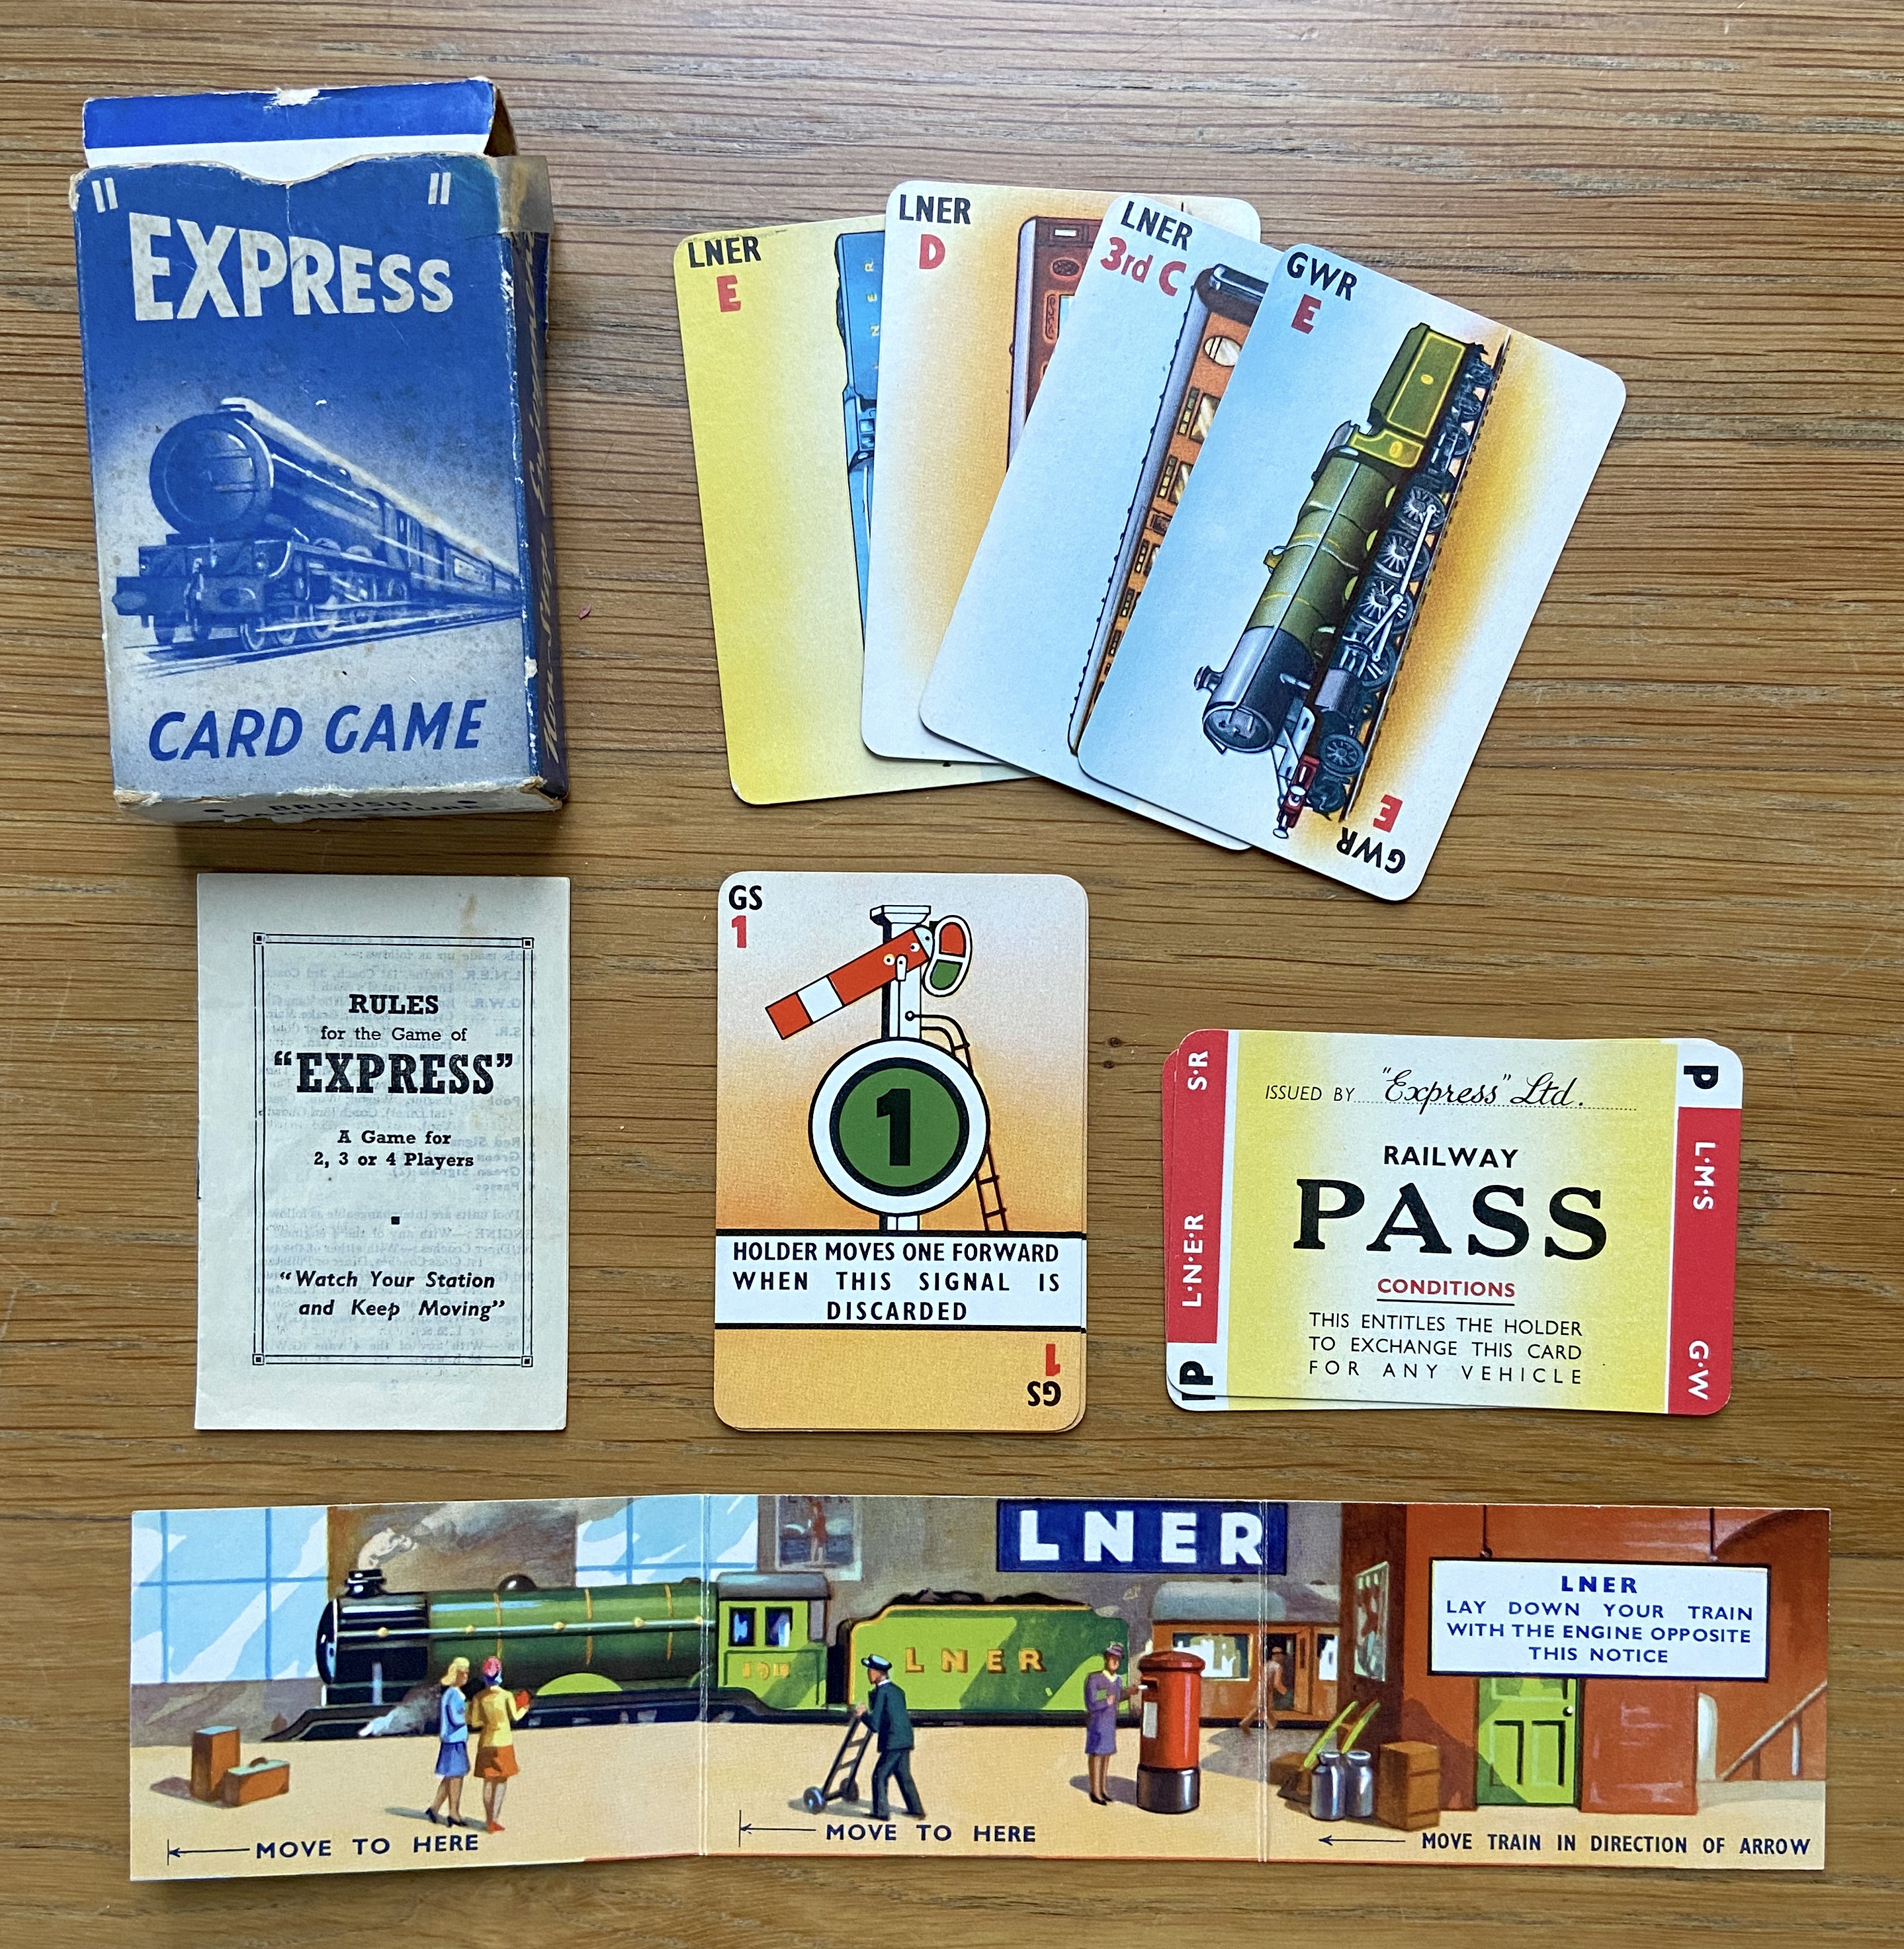 Express: Card Game (First Edition)